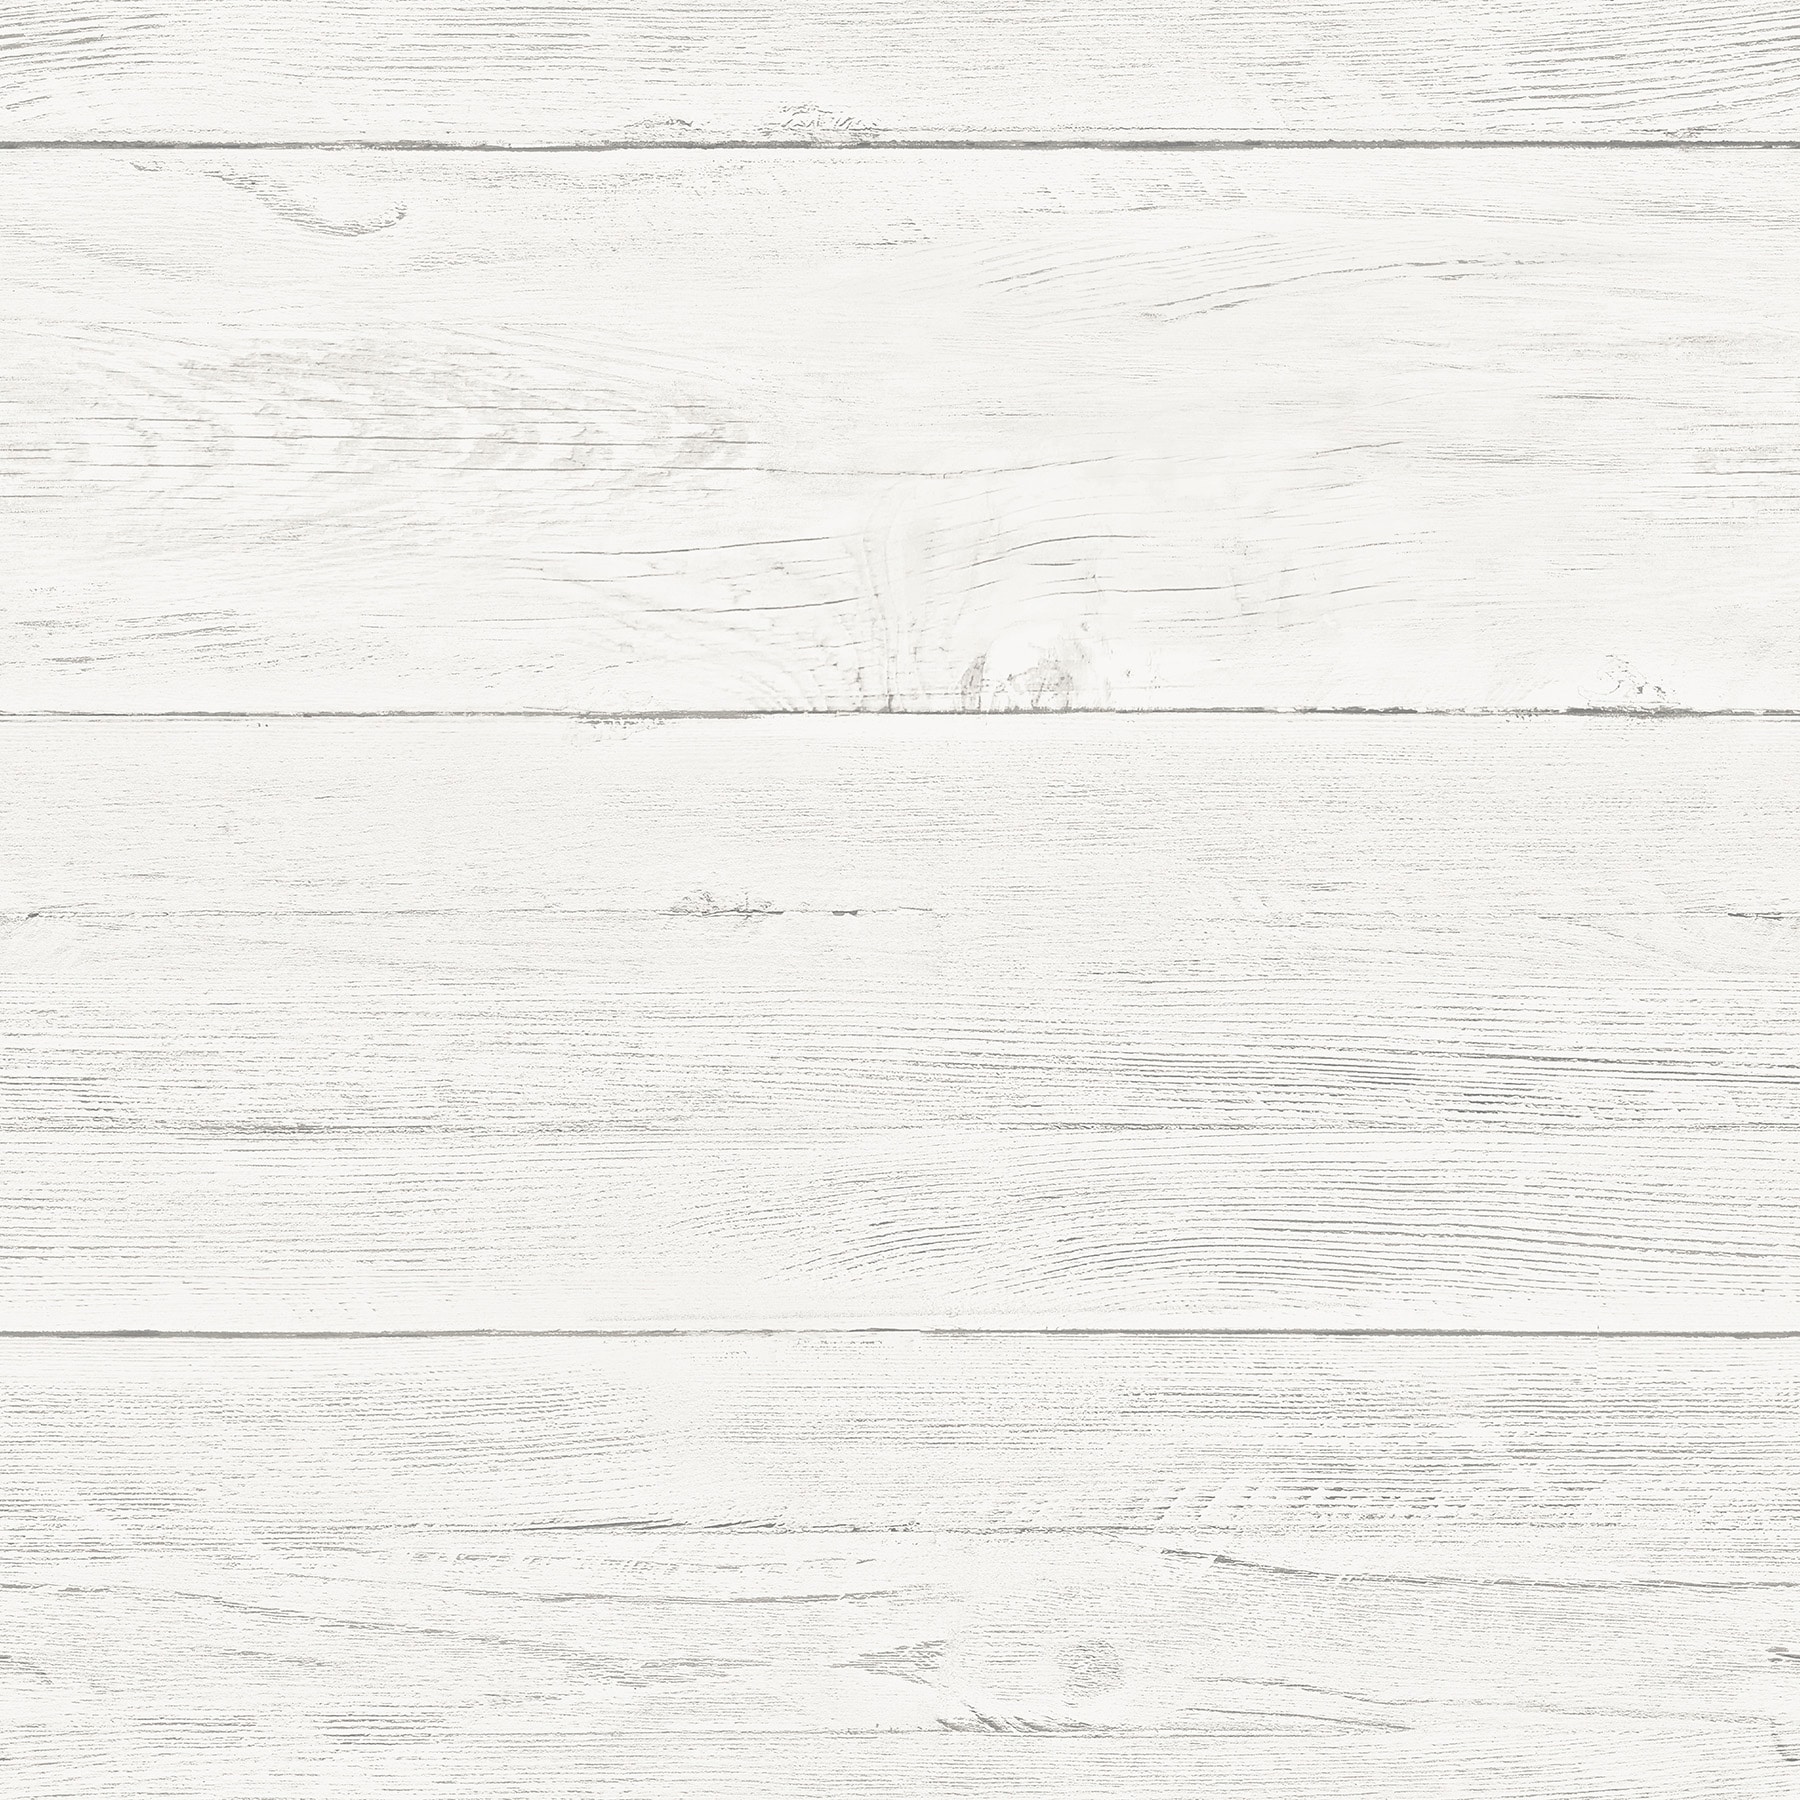 Wallpaper Black and White Wooden Surface, Background - Download Free Image